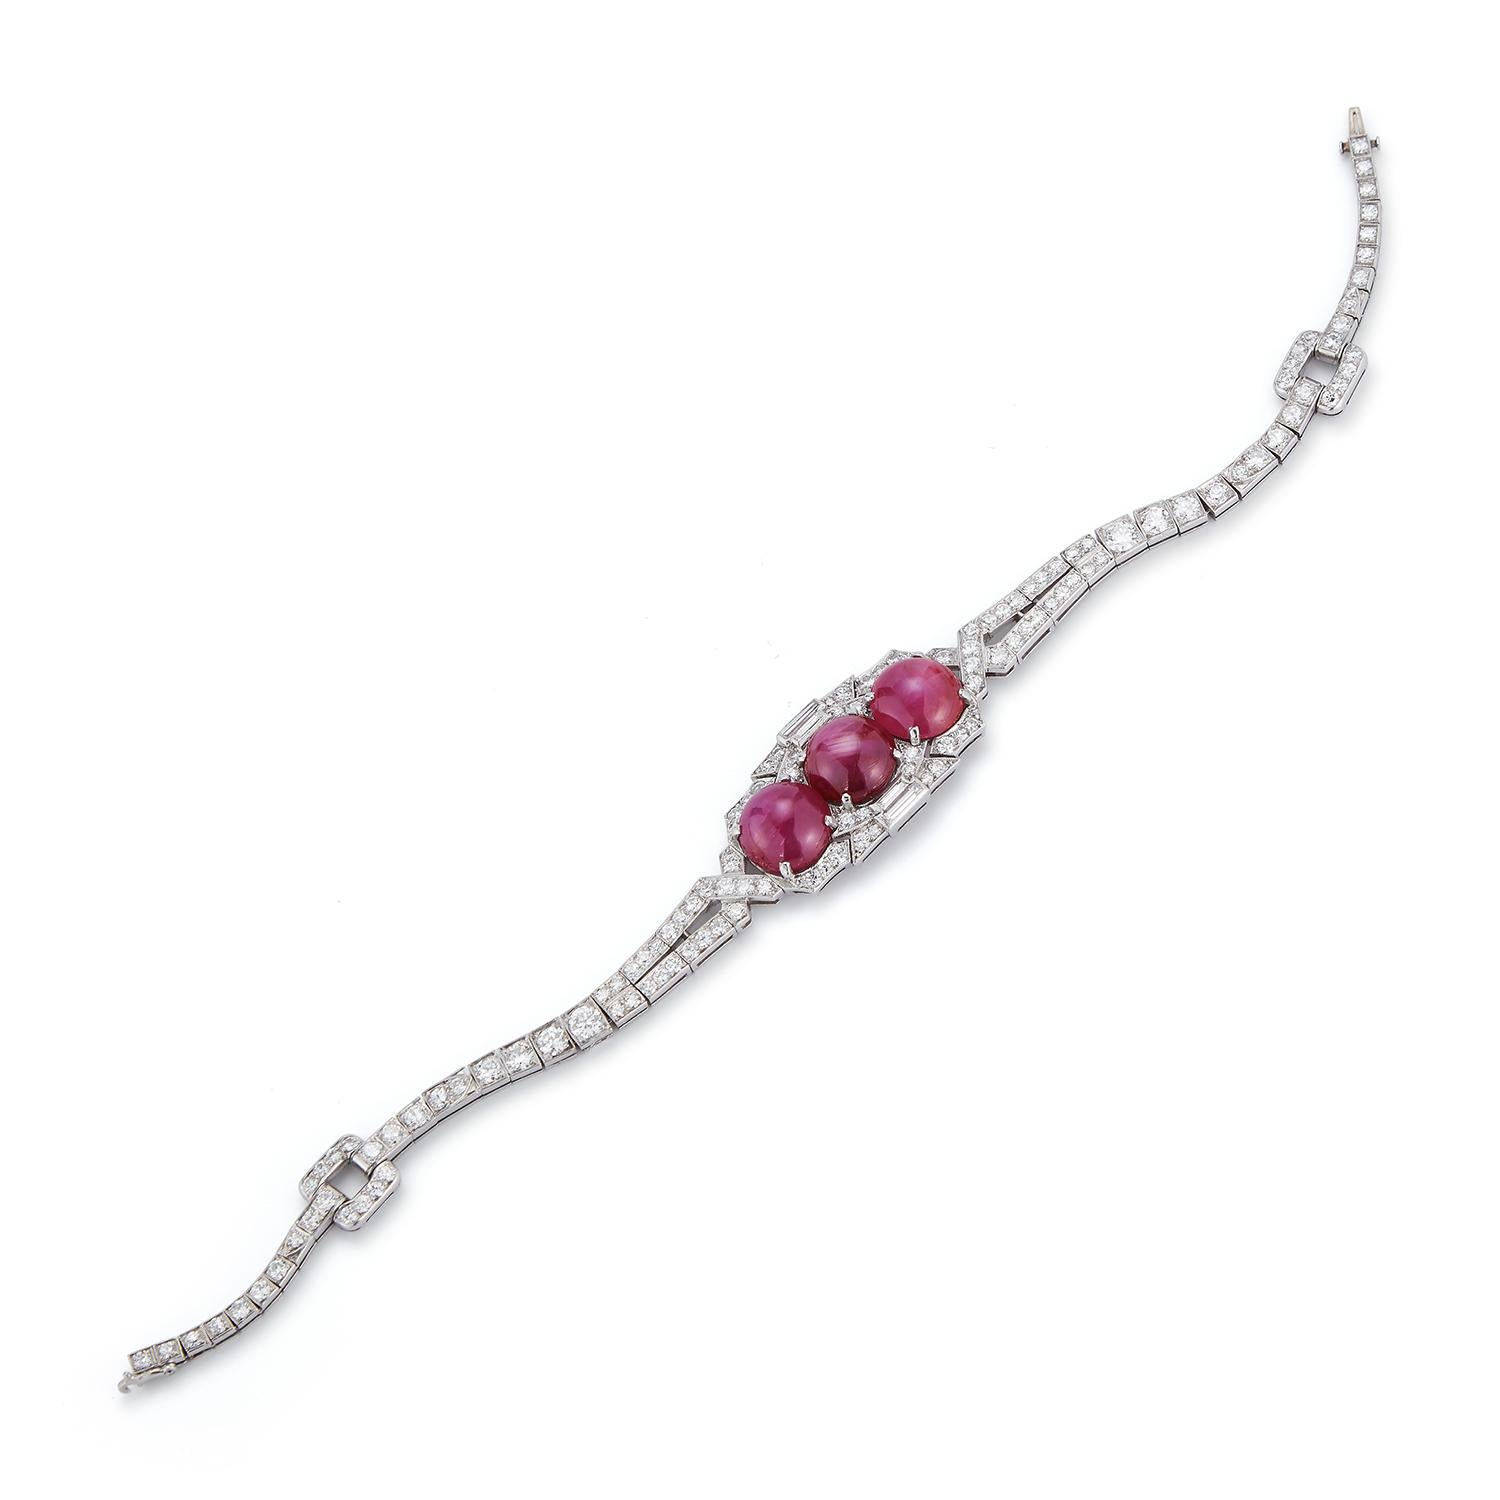 AGL Certified Cabochon Star Pink Sapphire and Diamond Art Deco Bracelet
3 cabochon star pink sapphire approximate Weight: 10.43 Carats 
4 baguette cut diamonds approximate Weight: .20 Carats 
130 round cut diamonds approximate Weight: 4.40 Carats